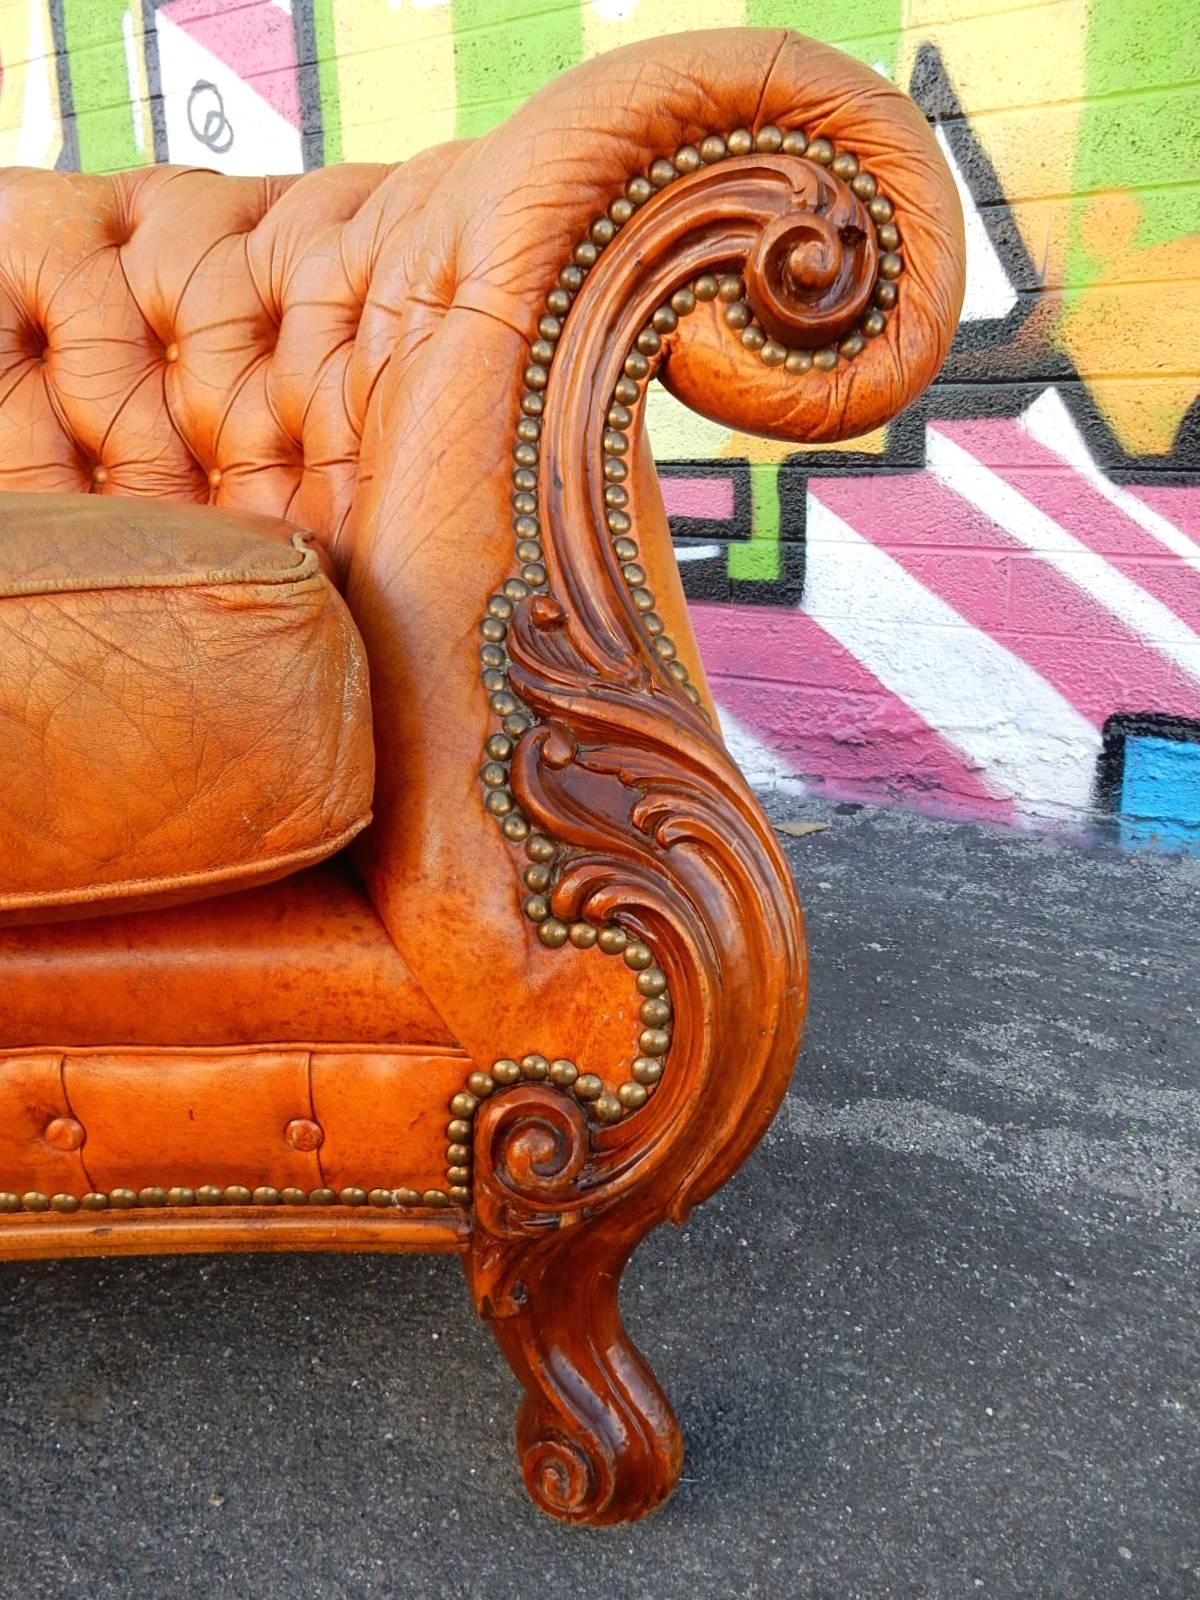 A Chesterfield sofa like no other. 
Supple marbled caramel leather & Naugahyde upholstery with beautifully hand carved scrolling detail on each side and legs.
 Aged brass tacks trim all edges.
The sitting area and tufted back leather is soft and